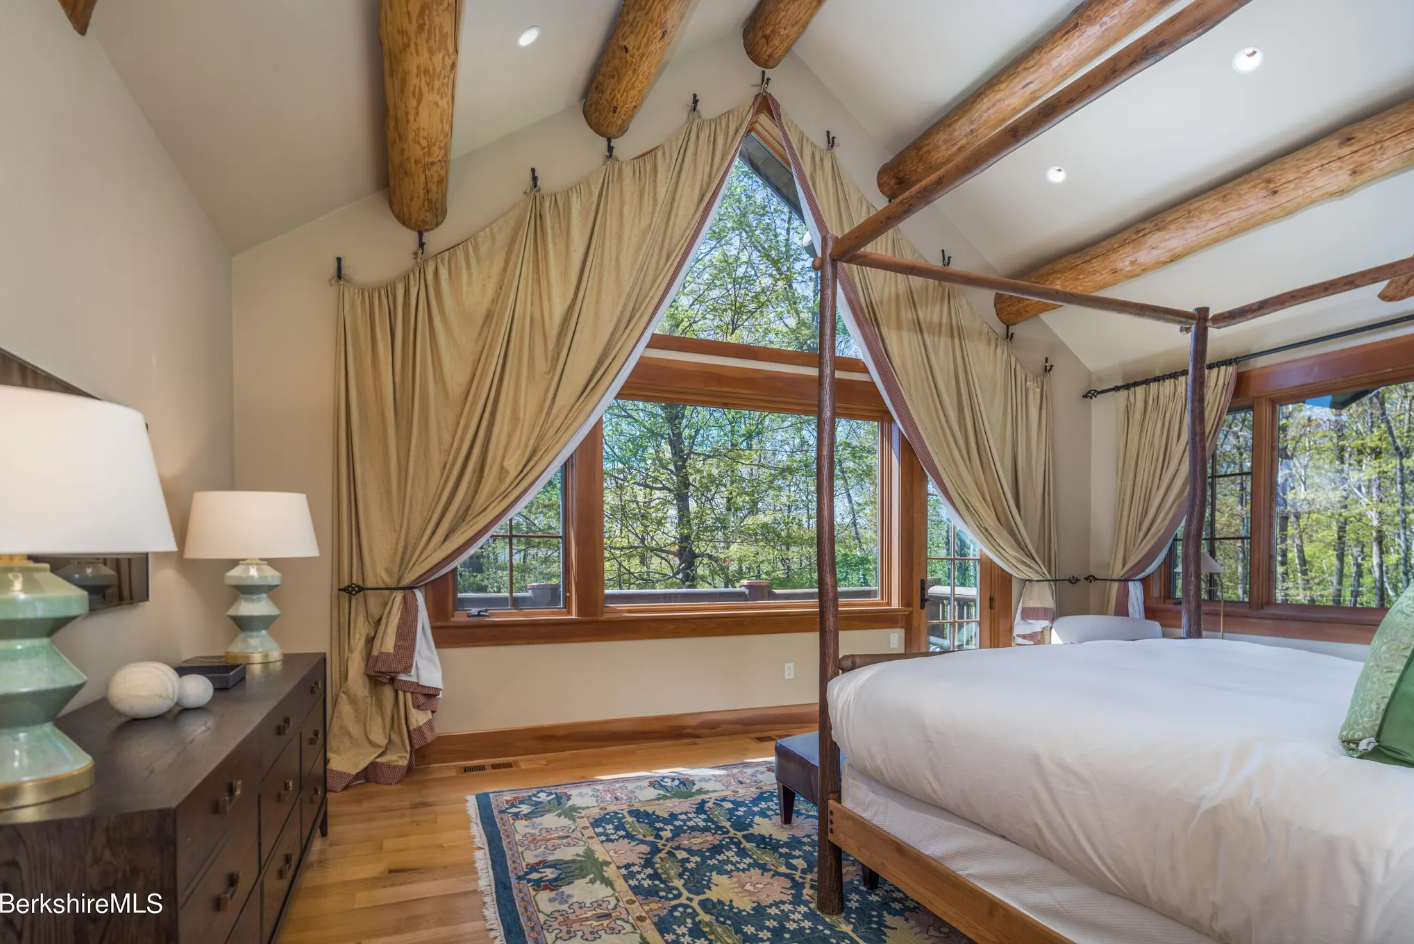 Primary bedroom with vaulted ceilings, picture windows with floor-to-ceiling curtains, hardwood floors, and exposed wood beams.